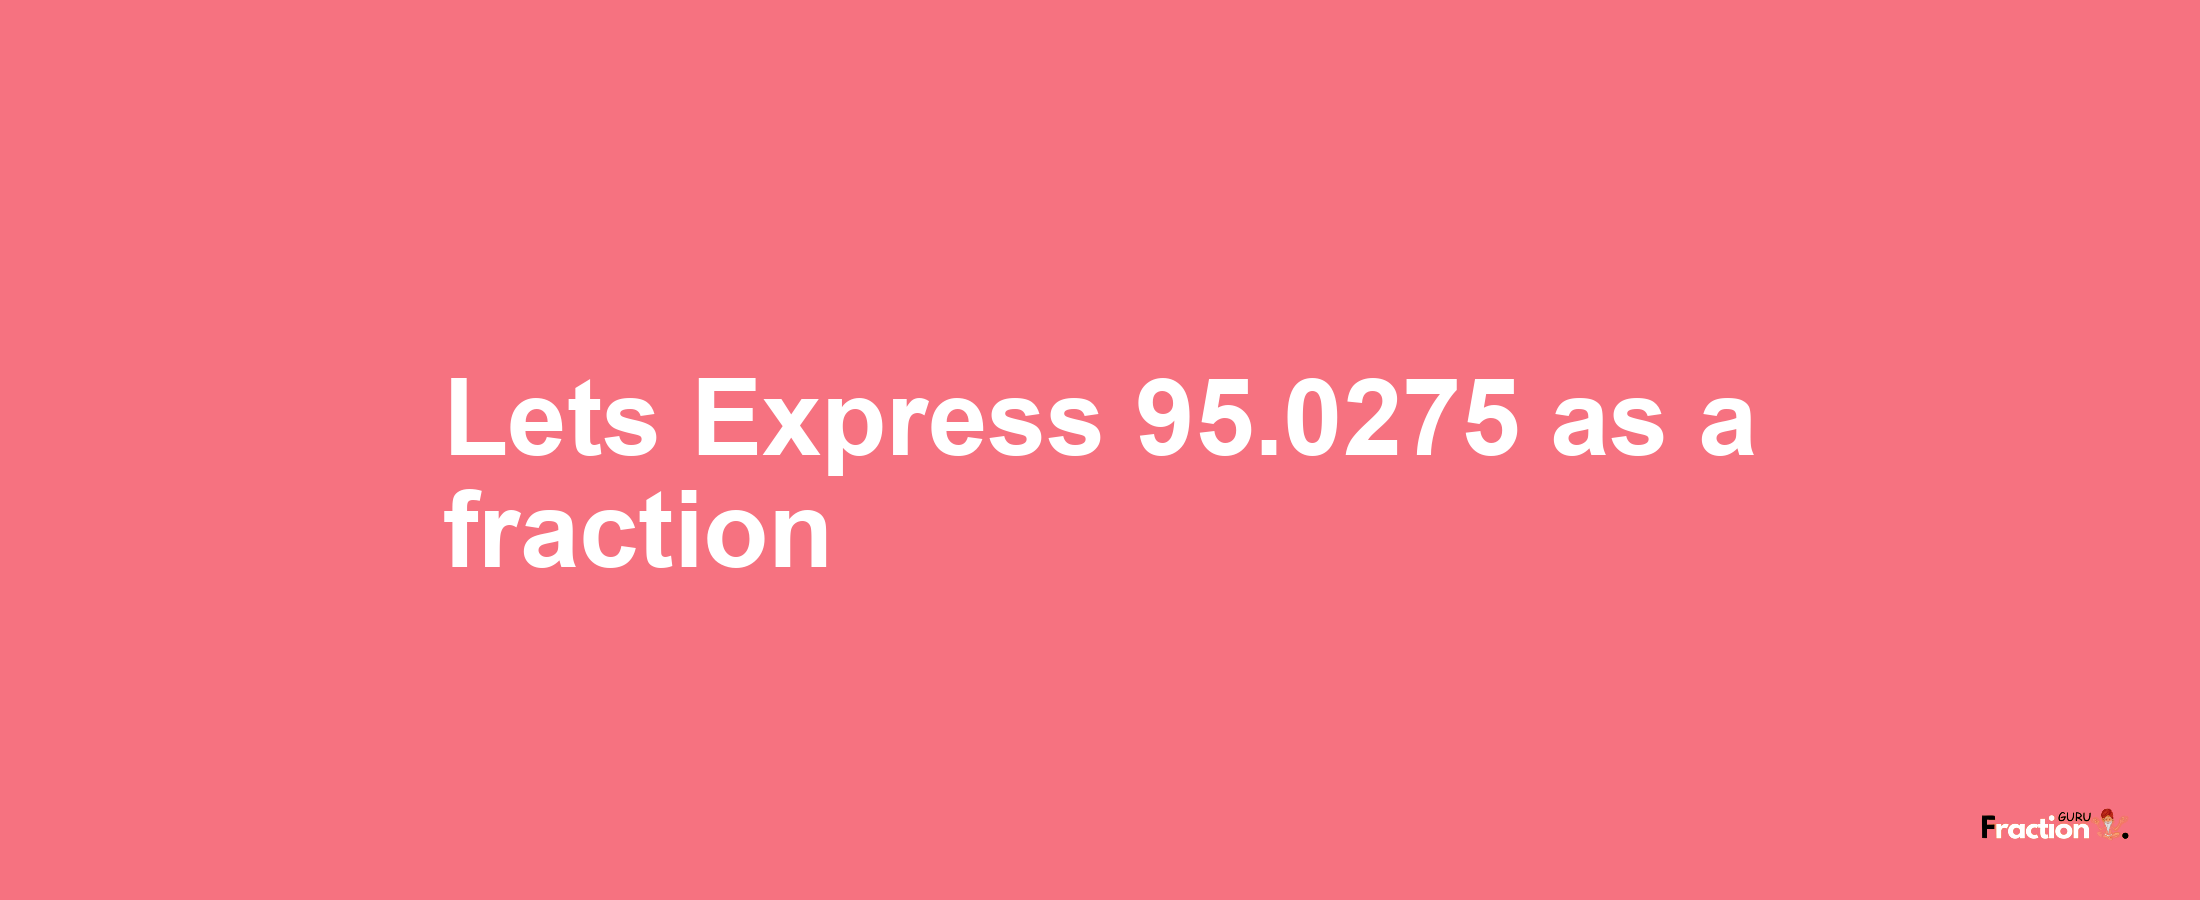 Lets Express 95.0275 as afraction